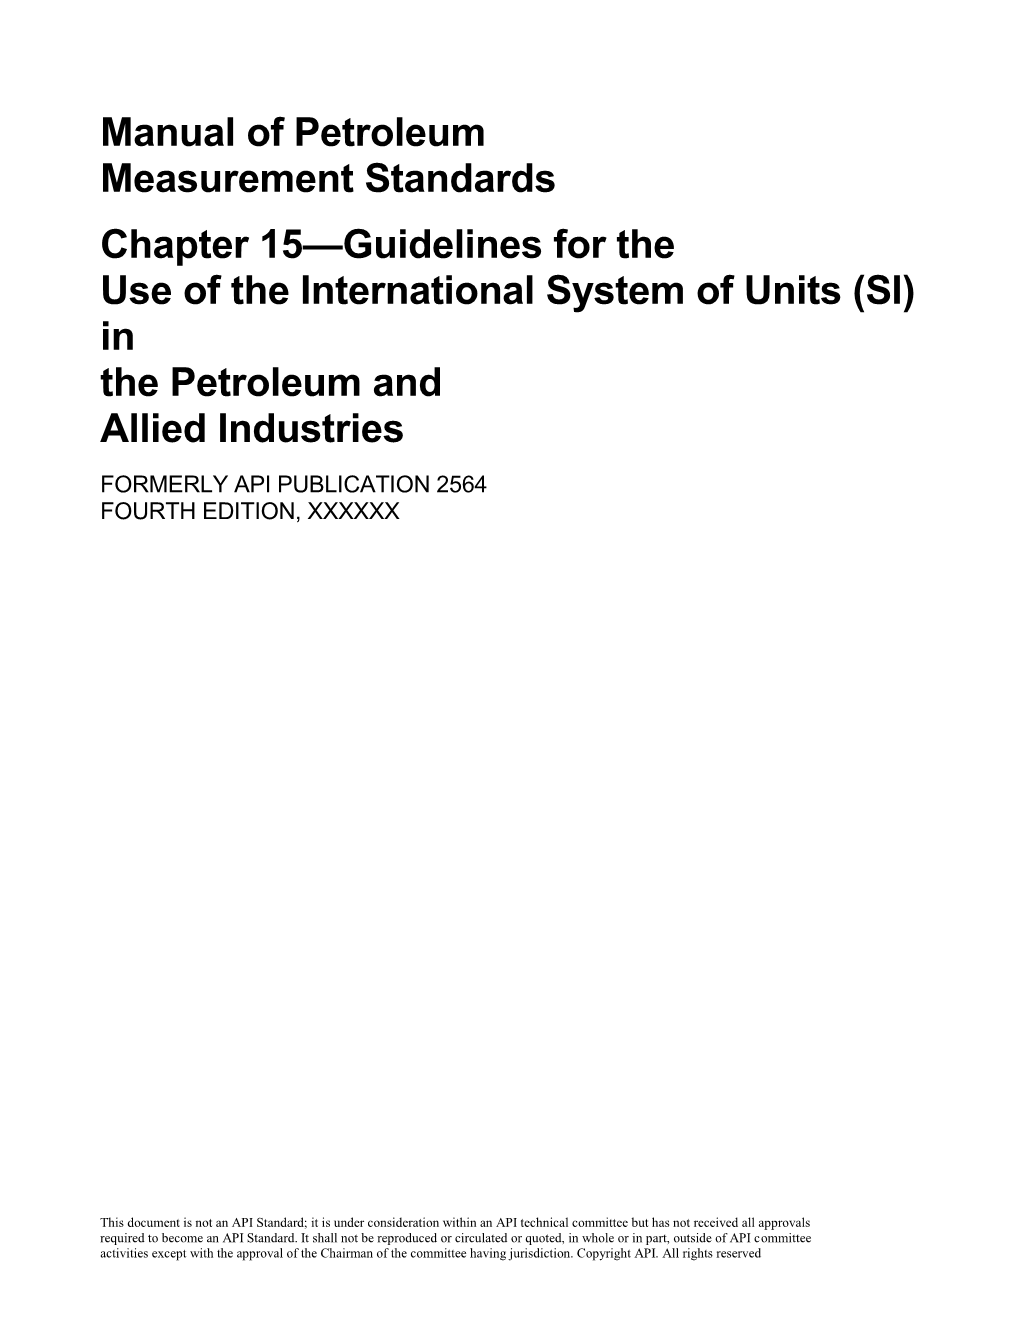 Manual of Petroleum Measurement Standards Chapter 15—Guidelines for the Use of the International System of Units (SI) in the Petroleum and Allied Industries